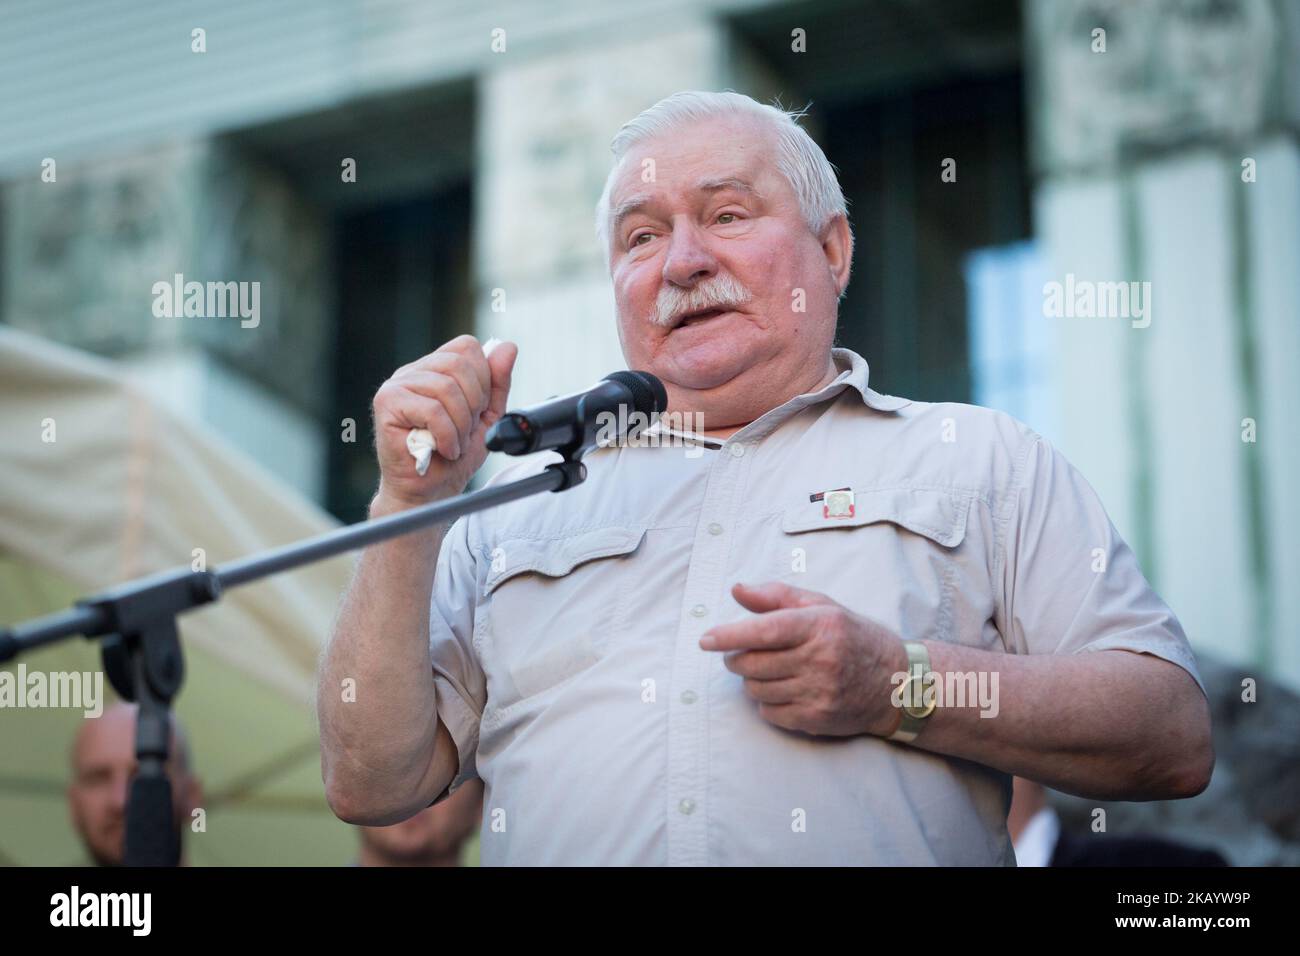 Polish former president and Nobel Peace Prize winner Lech Walesa addresses a crowd of right-wing government opponents during the protest in front of the Sad Najwyzszy, (the Polish Supreme Court) in Warsaw, Poland on 4 July 2018. Poland’s international isolation and political uncertainty at home has deepened as a purge of the Supreme Court’s justices took effect, with the chief justice defiantly refusing to step down. First President Malgorzata Gersdorf arrived for work as usual at the court in Warsaw, vowing to continue her constitutionally mandated term, which runs through 2020. (Photo by Mat Stock Photo